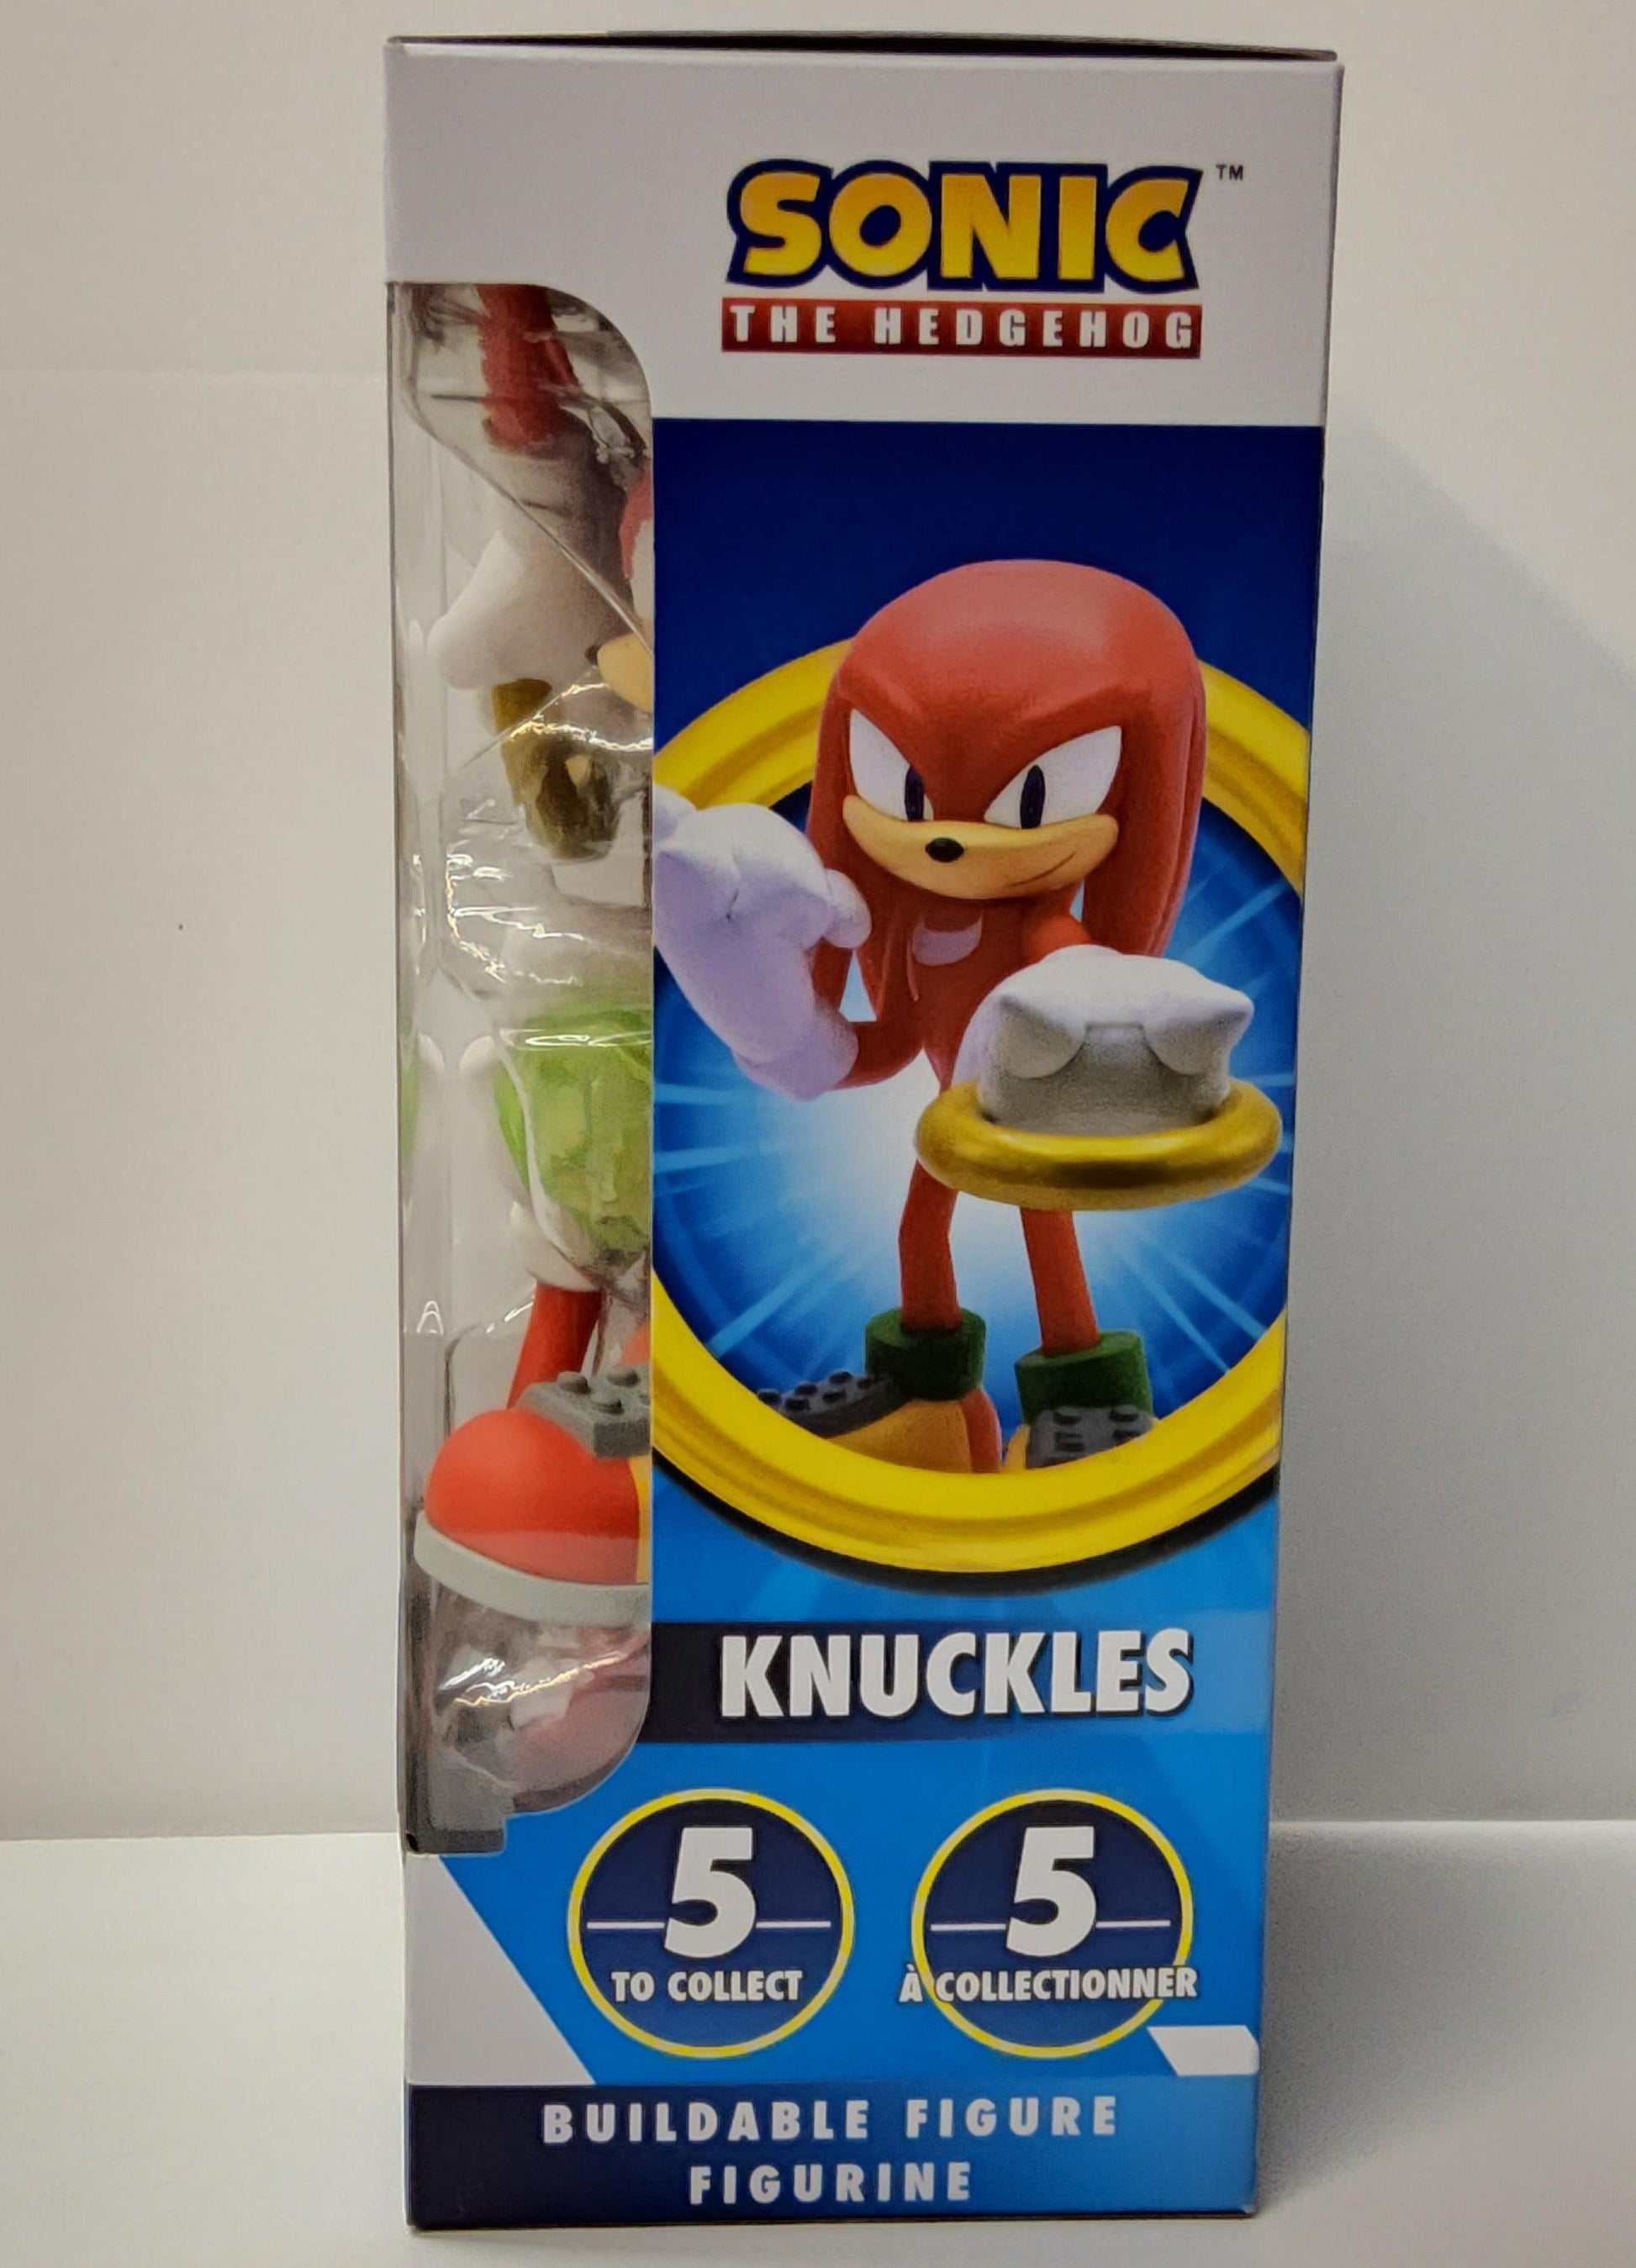 Just Toys INTL Sonic the Hedgehog Knuckles Buildable Figure Figurine w